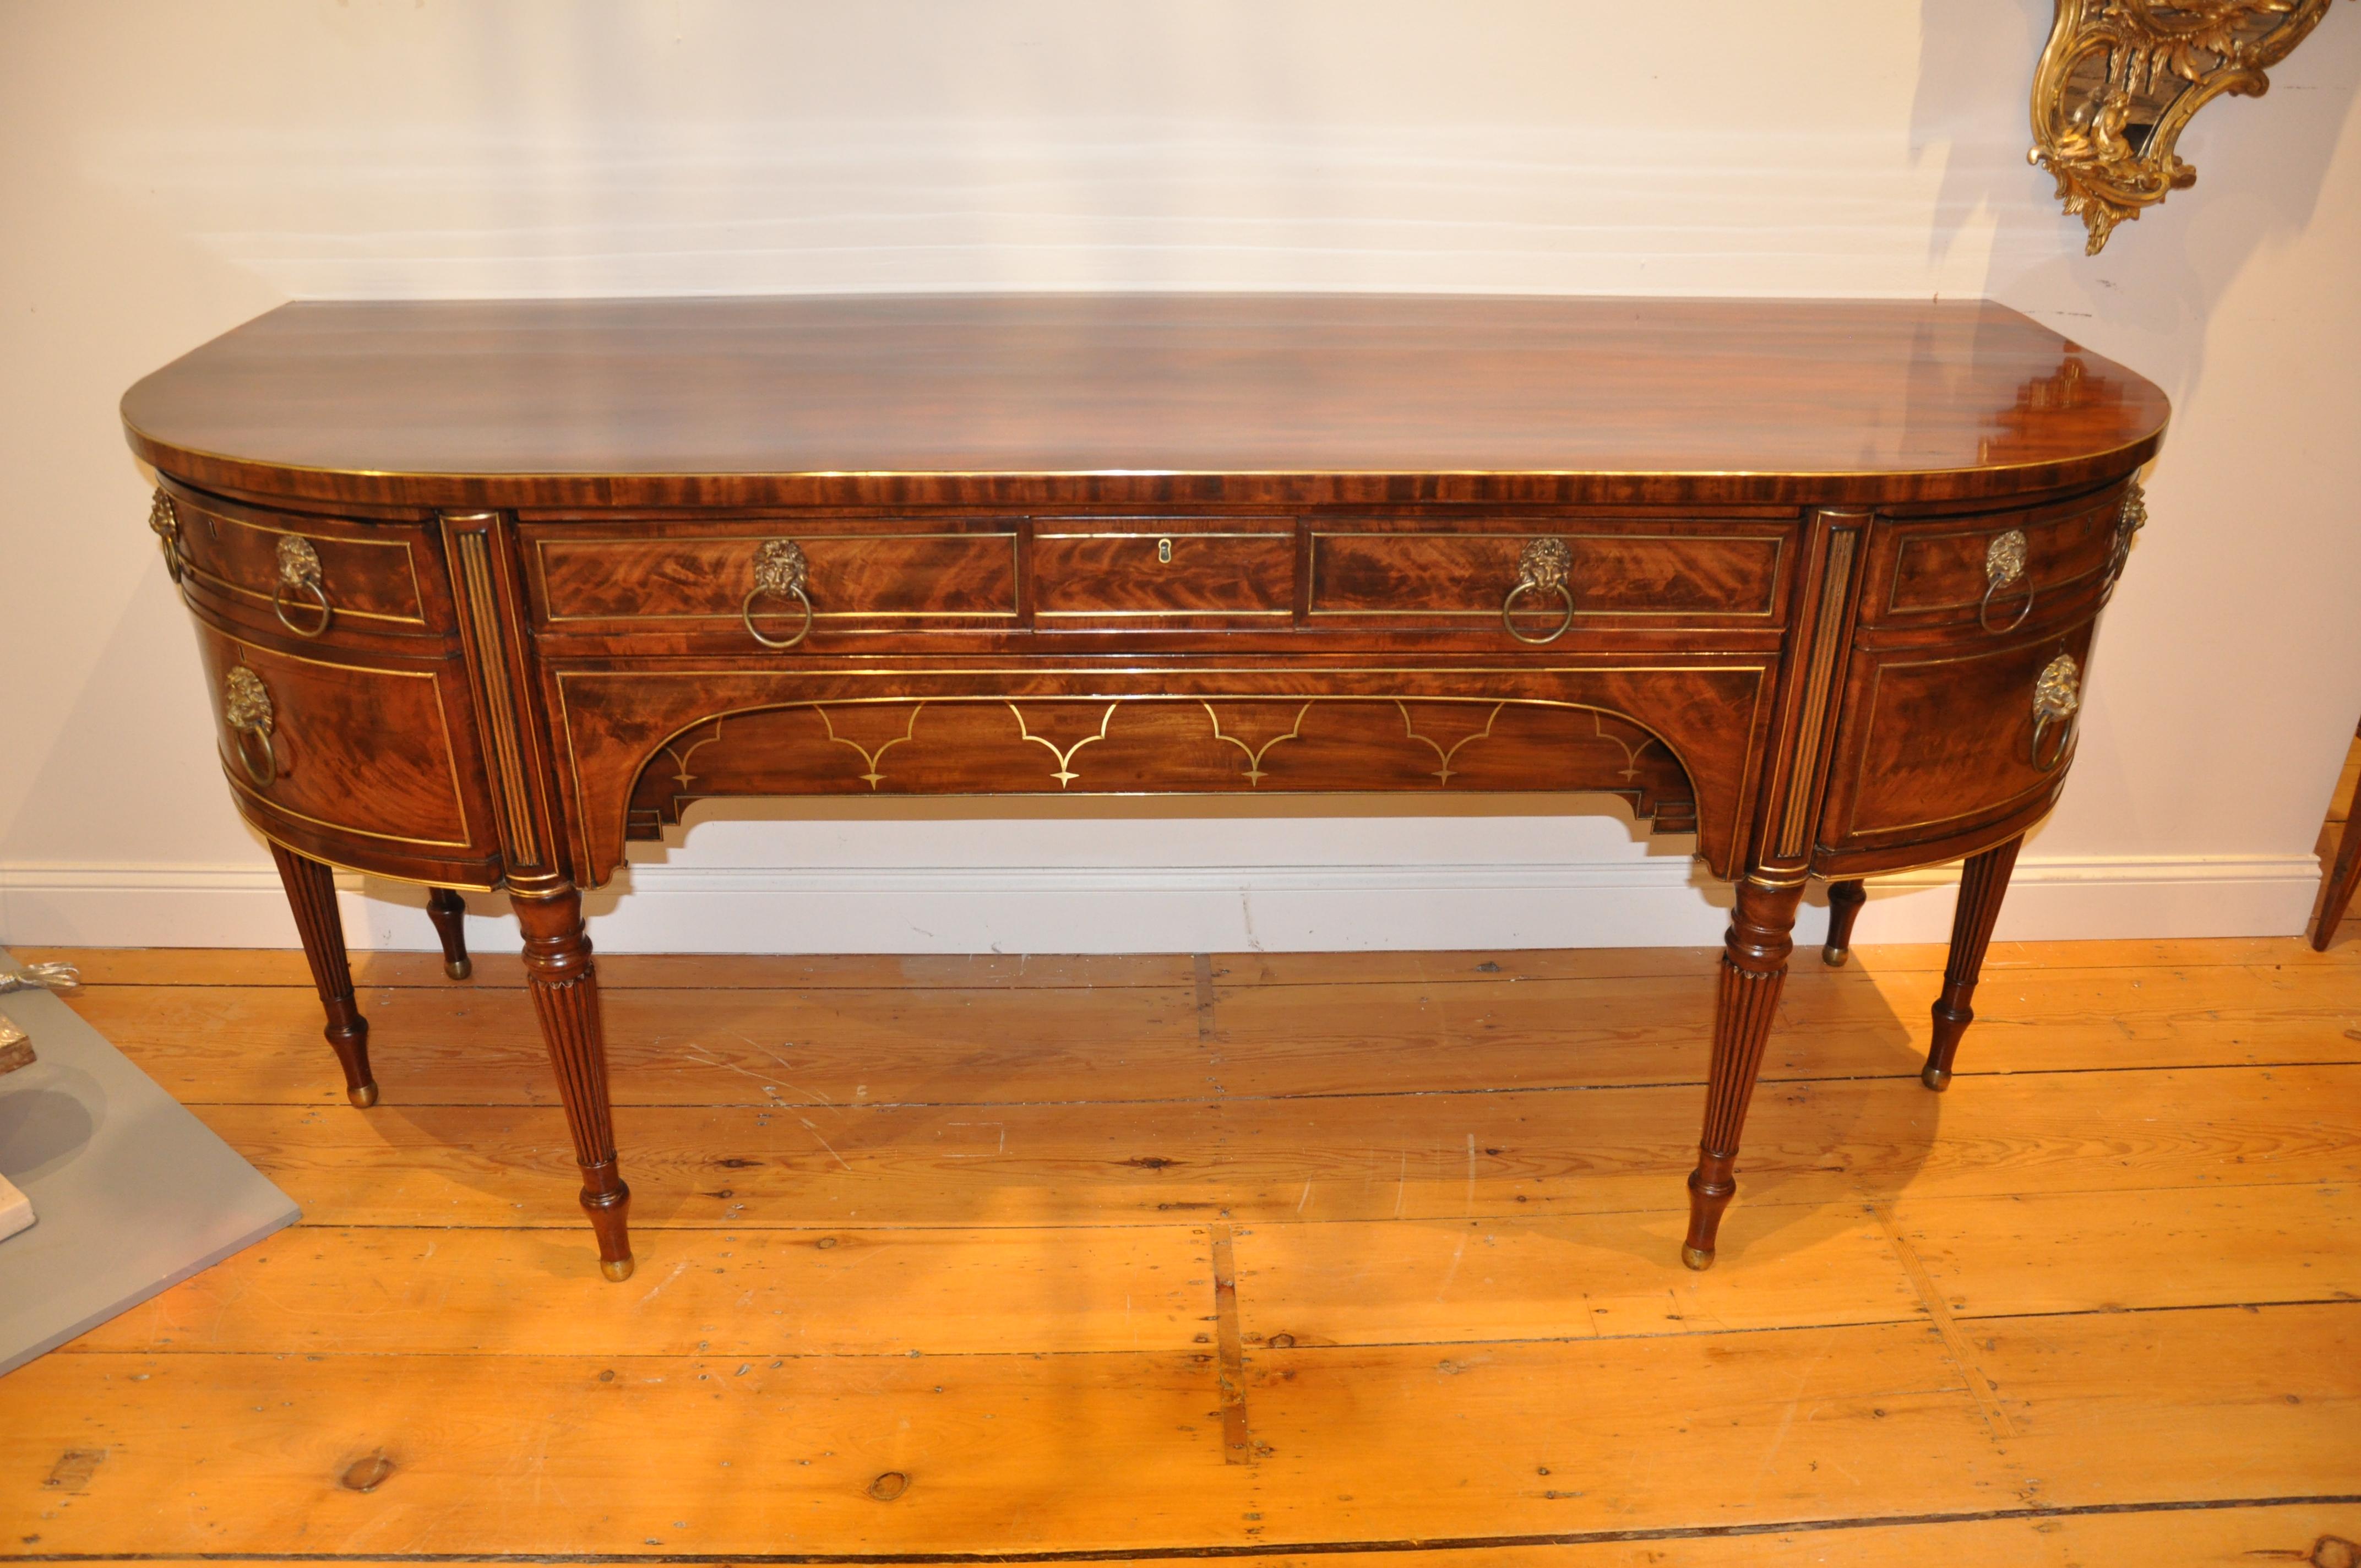 Exquisite English Regency brass banded mahogany sideboard of the finest quality. Probably Gillows. With internal Wine 